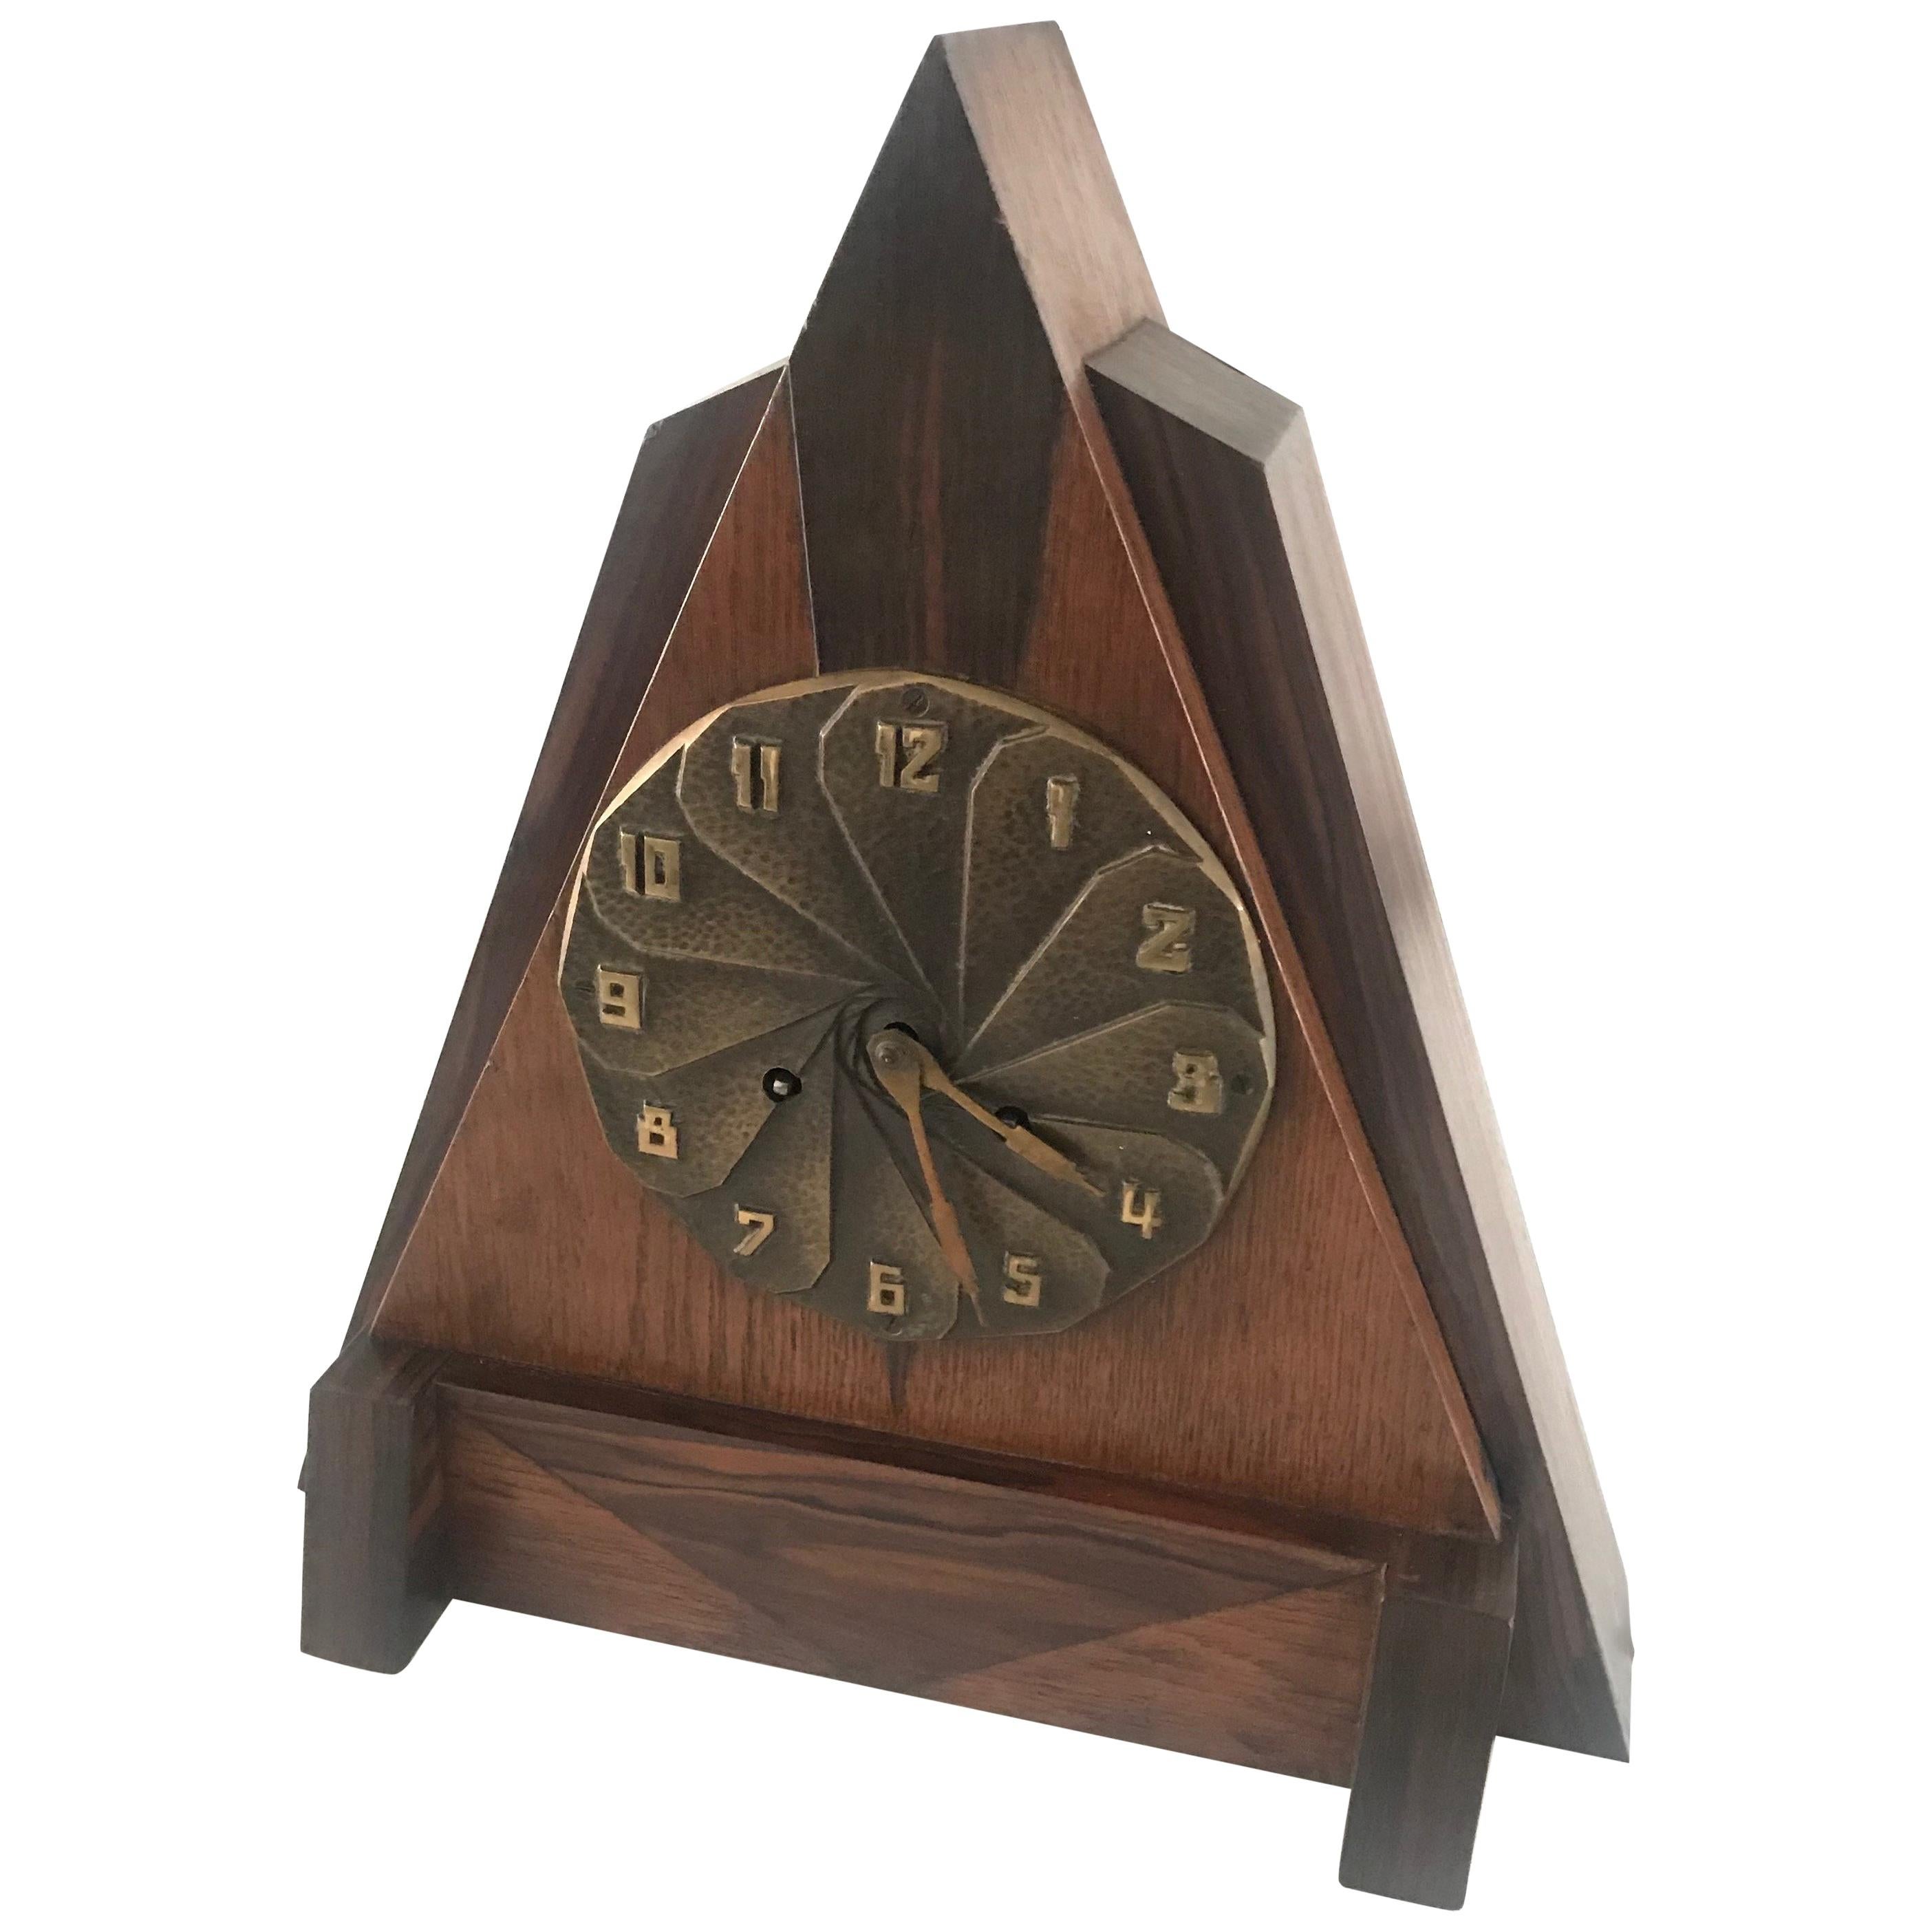 Early 20th century, great design and well working Art Deco clock.

If you are looking for a great shape and condition Art Deco clock then this original 1920s specimen could be perfect for you. Thanks to the sleek and timeless, modernist design this